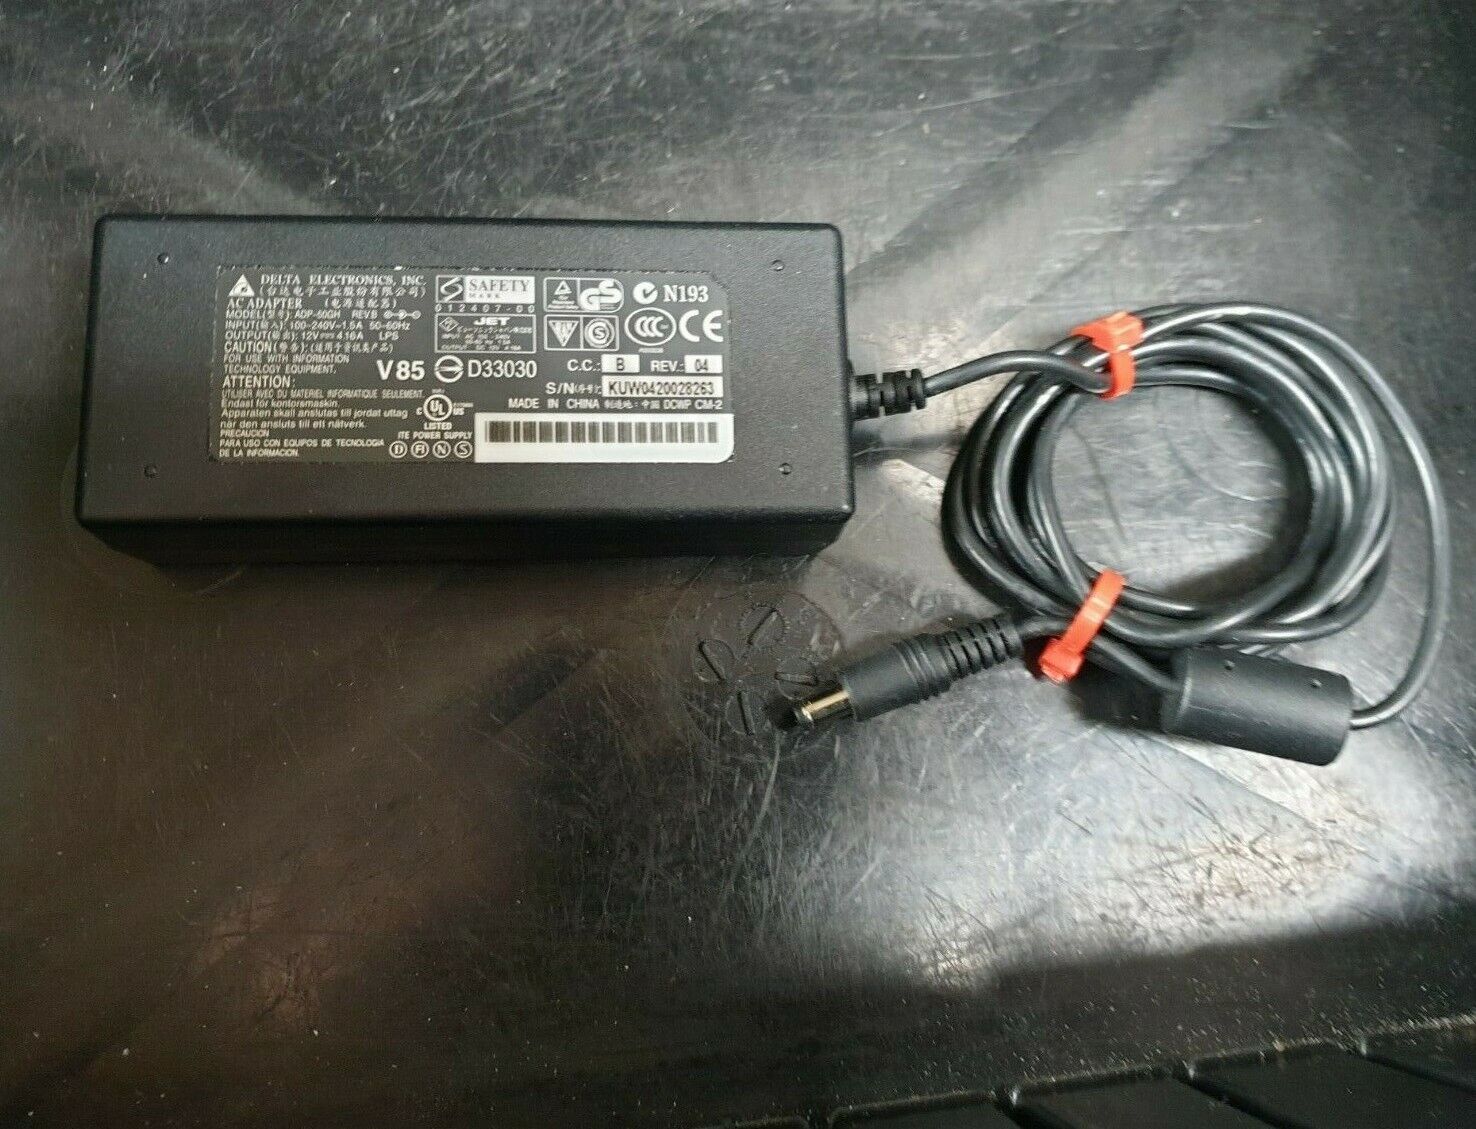 *Brand NEW* DELTA ELECTRONICS ADP-50GH B 12V 4.16A AC ADAPTER (R4S13.1B2)POWER Supply - Click Image to Close